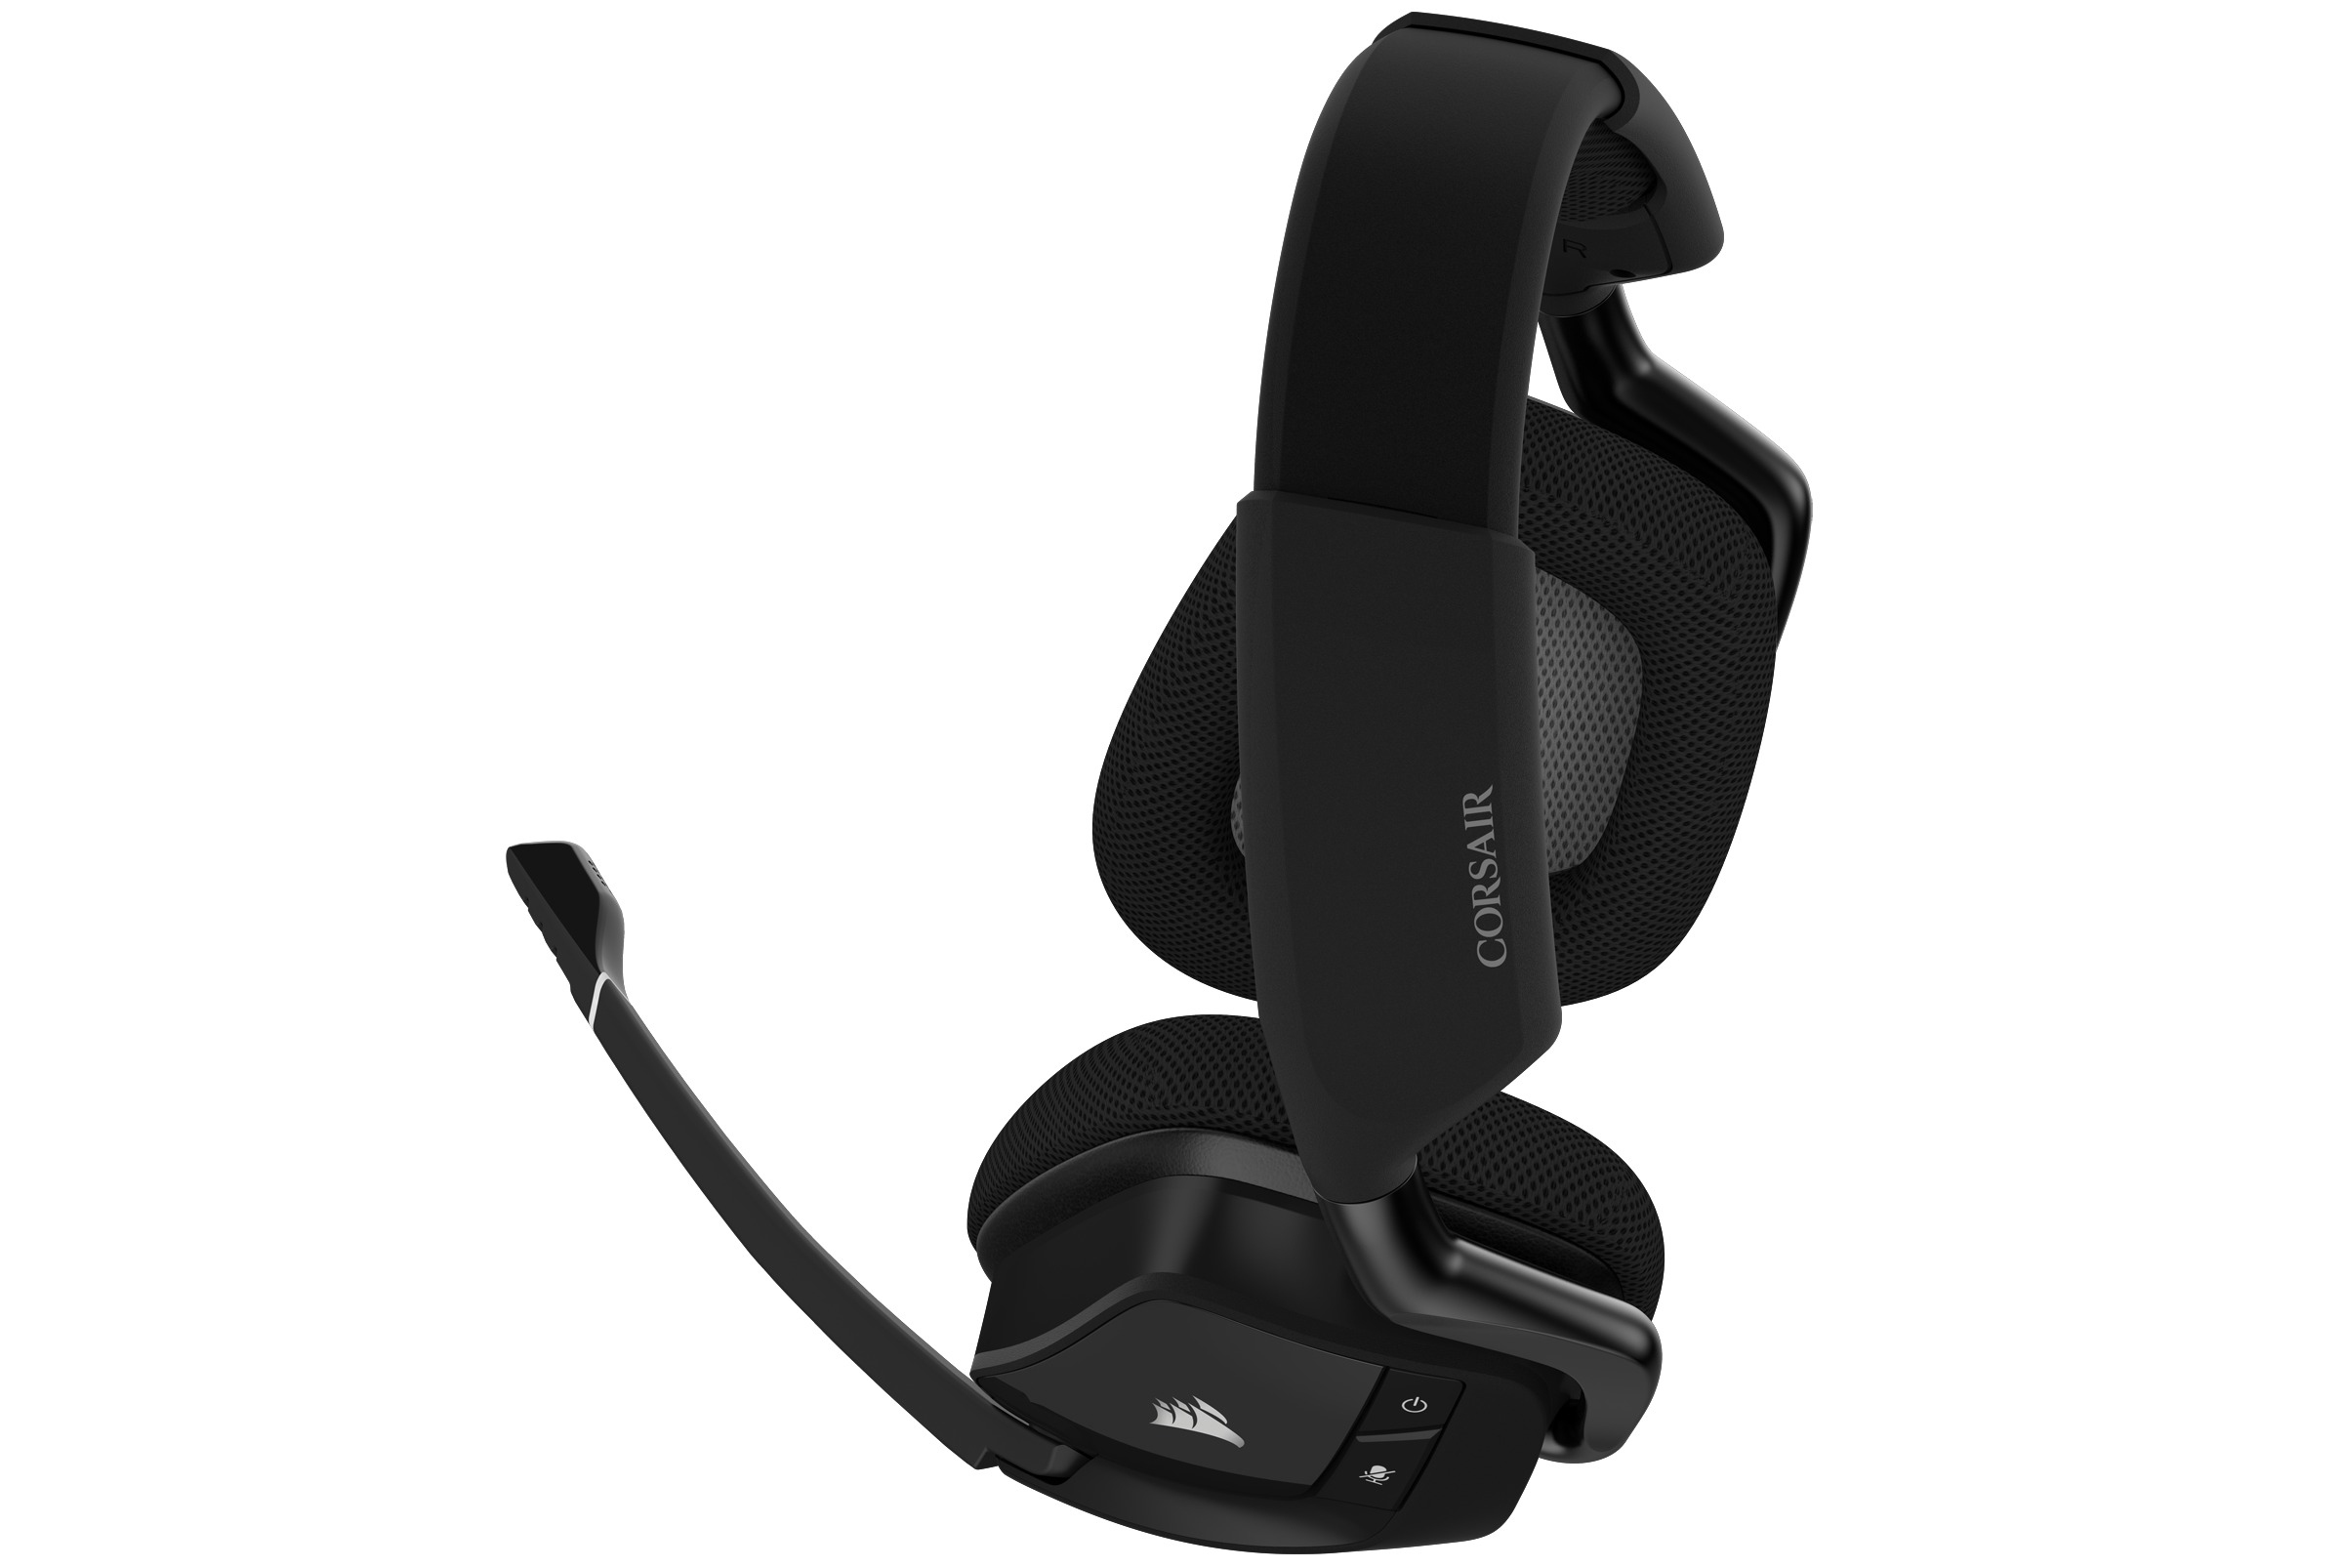 Headset Carbon Gaming CA-9011201, Over-ear CORSAIR